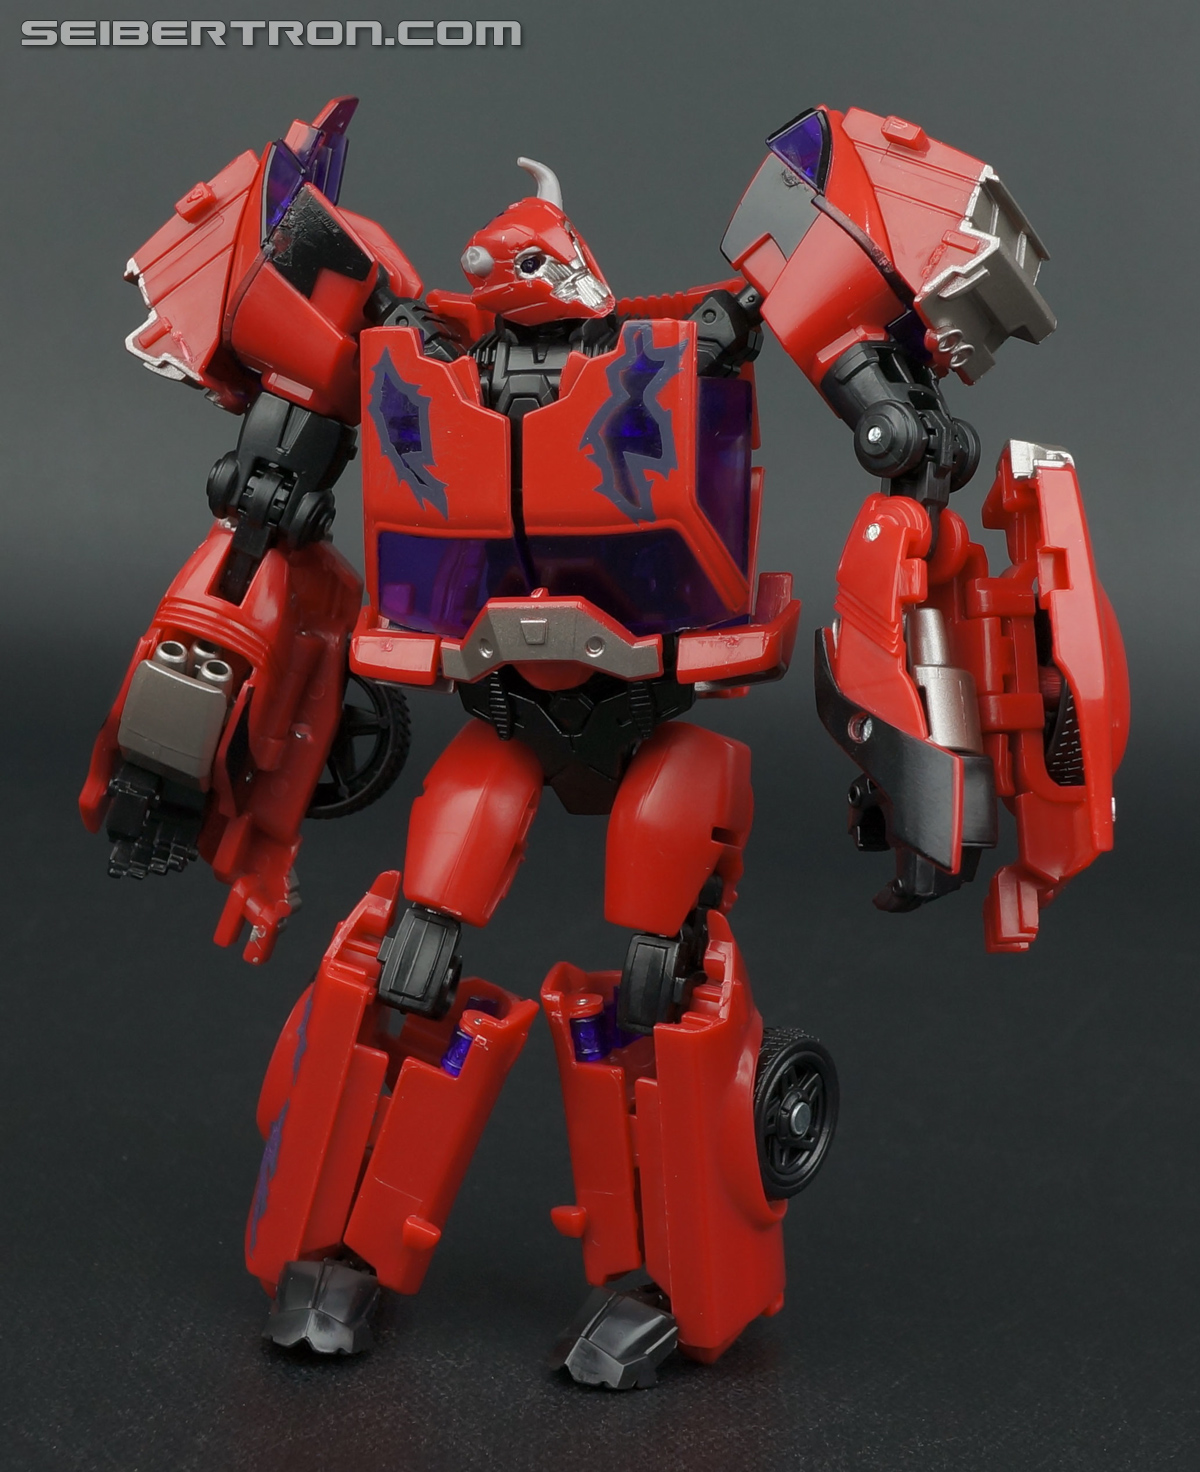 Transformers Prime: First Edition Terrorcon Cliffjumper (Image #141 of 179)